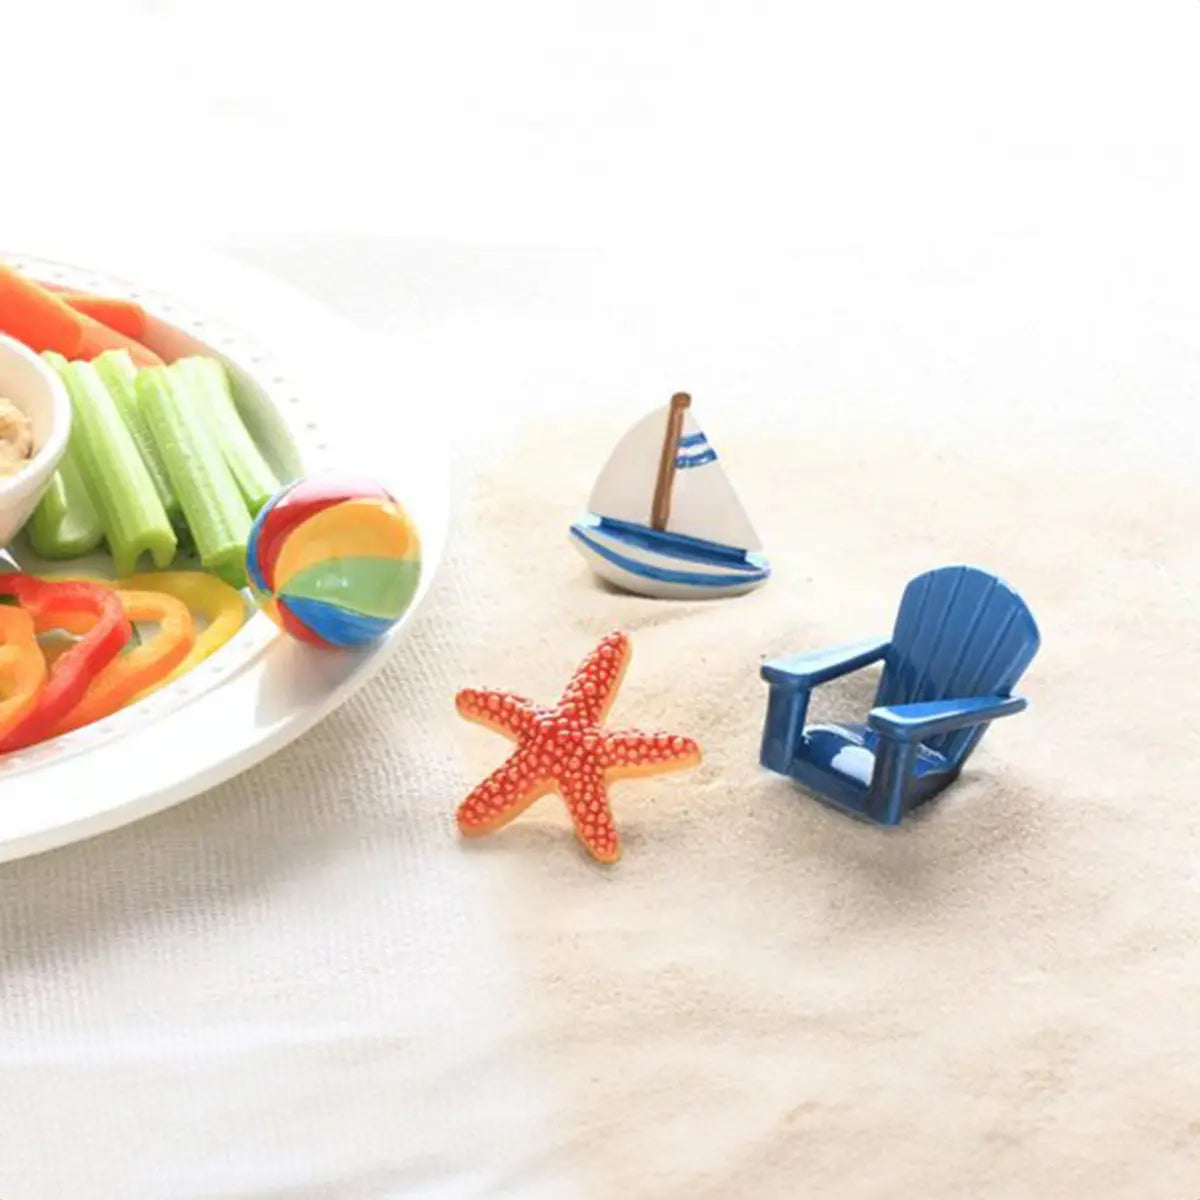 Nora Fleming Sea Star Starfish Mini on the sand next to the Adirondack chair, sail boat and a plate of food